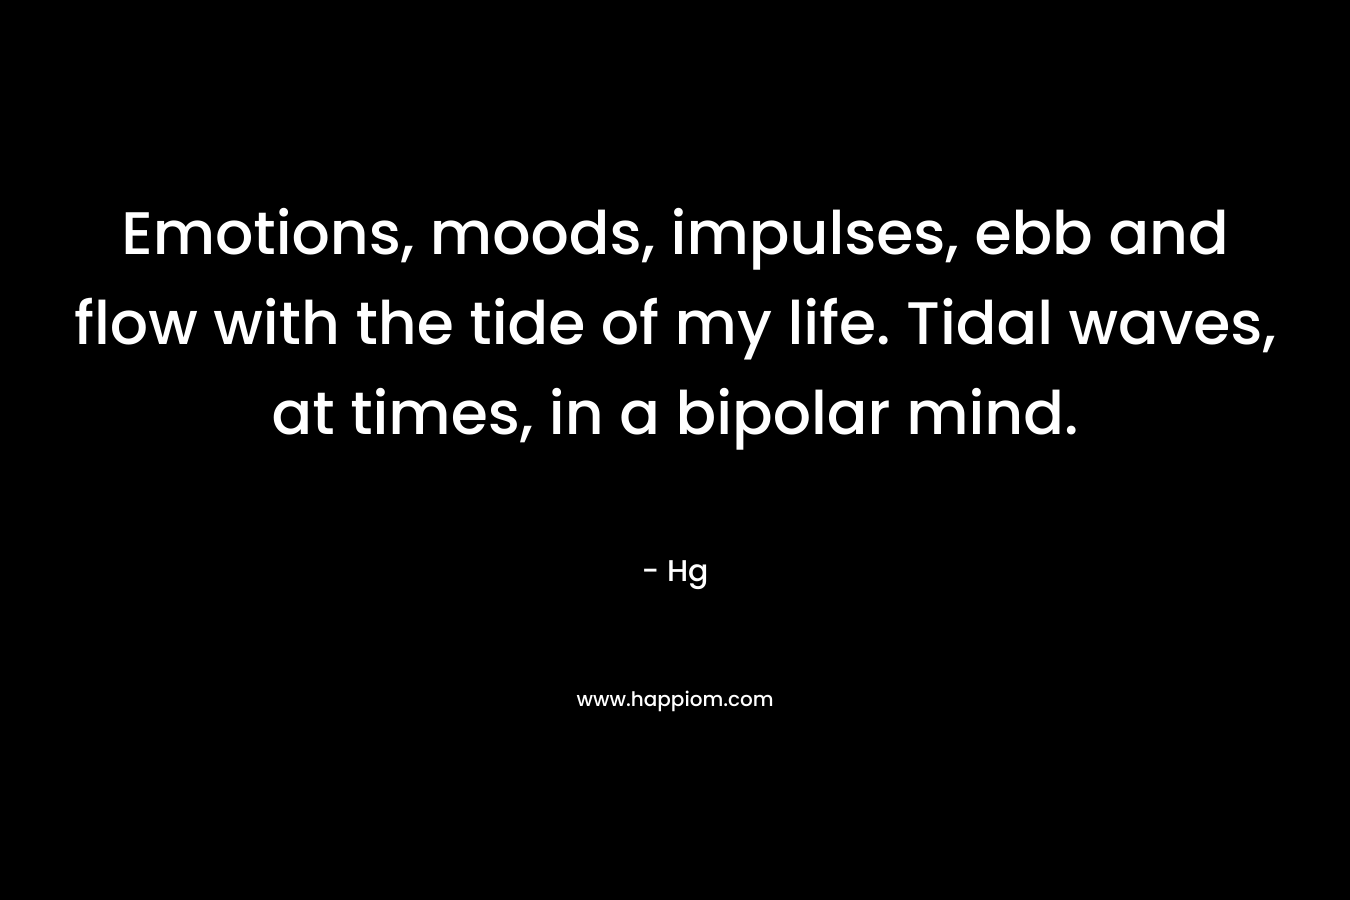 Emotions, moods, impulses, ebb and flow with the tide of my life. Tidal waves, at times, in a bipolar mind.